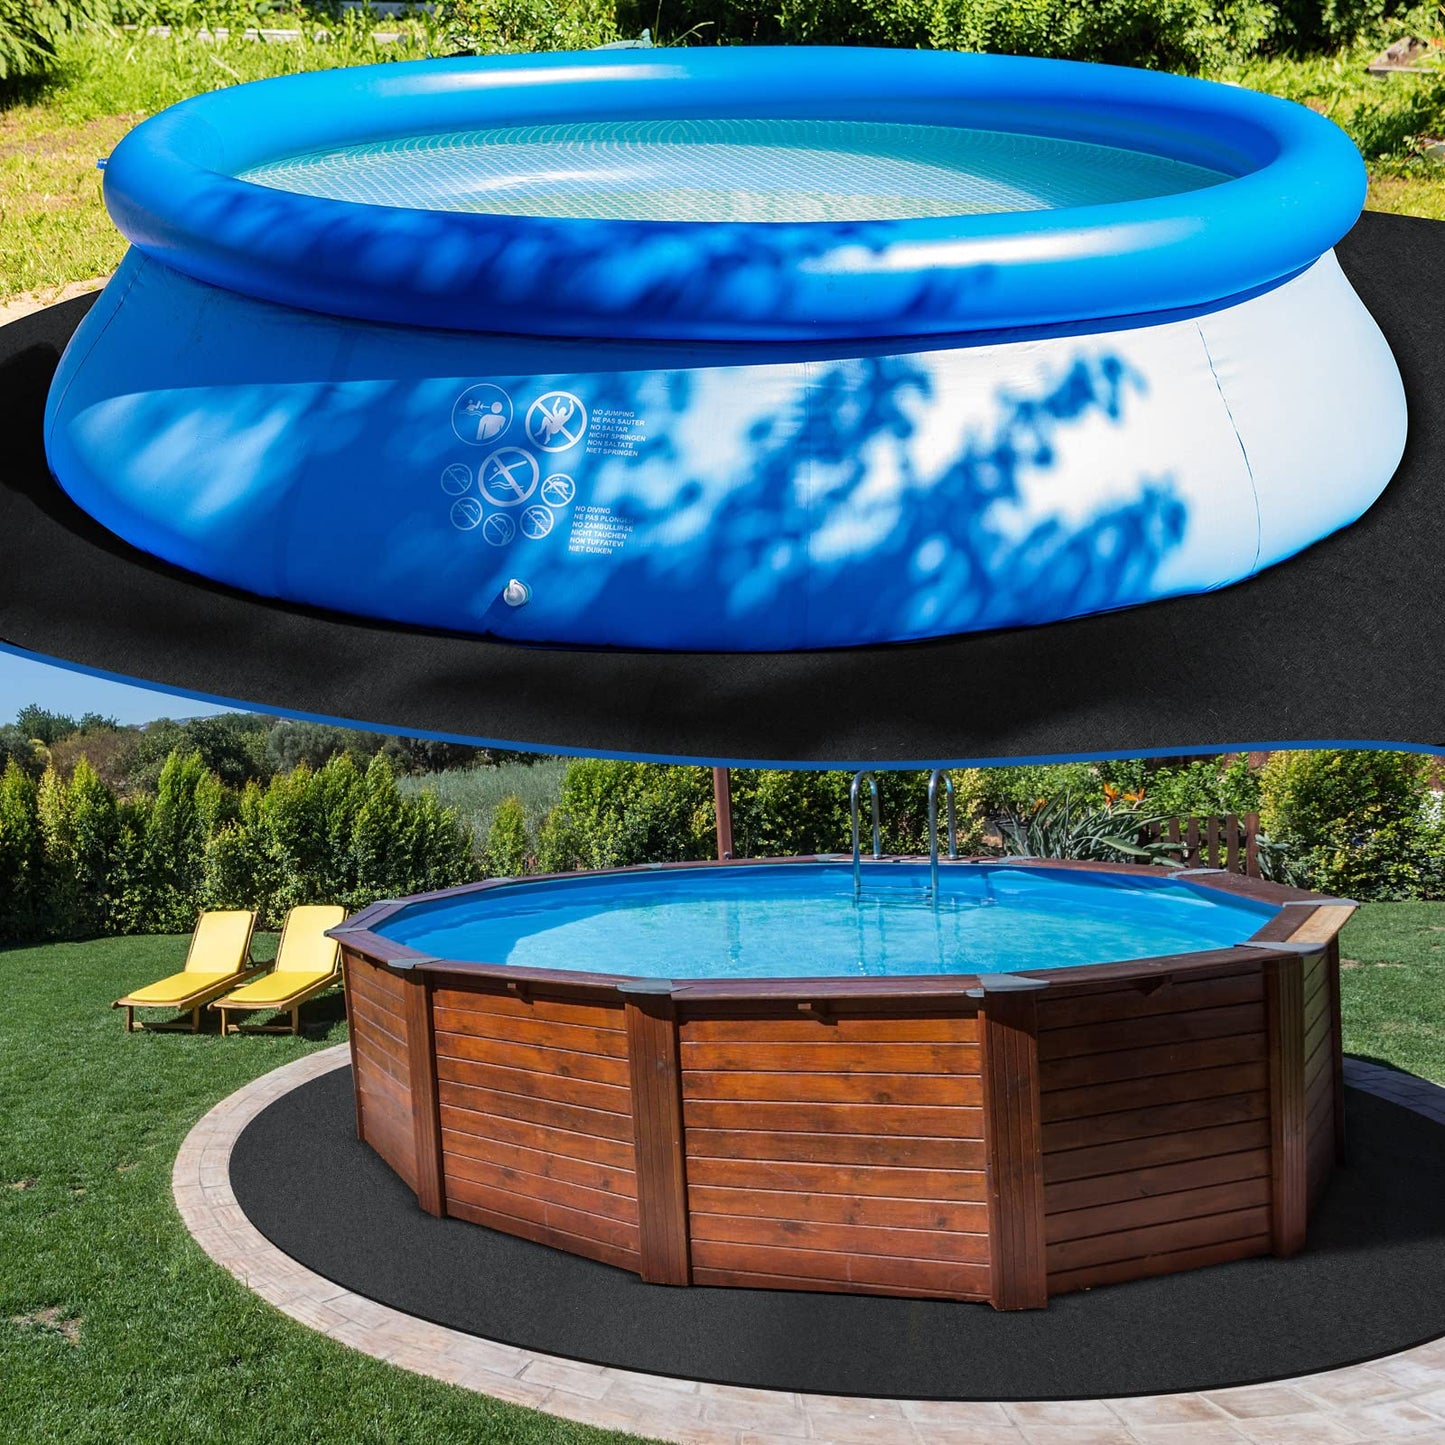 12 Foot 144 Inch Hot Tub Mat Round Pool Liner Pad for Above Ground Outdoor Indoor, Inflatable Swimming Pools Anti Slip Pad, Protect Hot Tub Pool from Wear, Absorbent Spa Pool Flooring Protector Mat